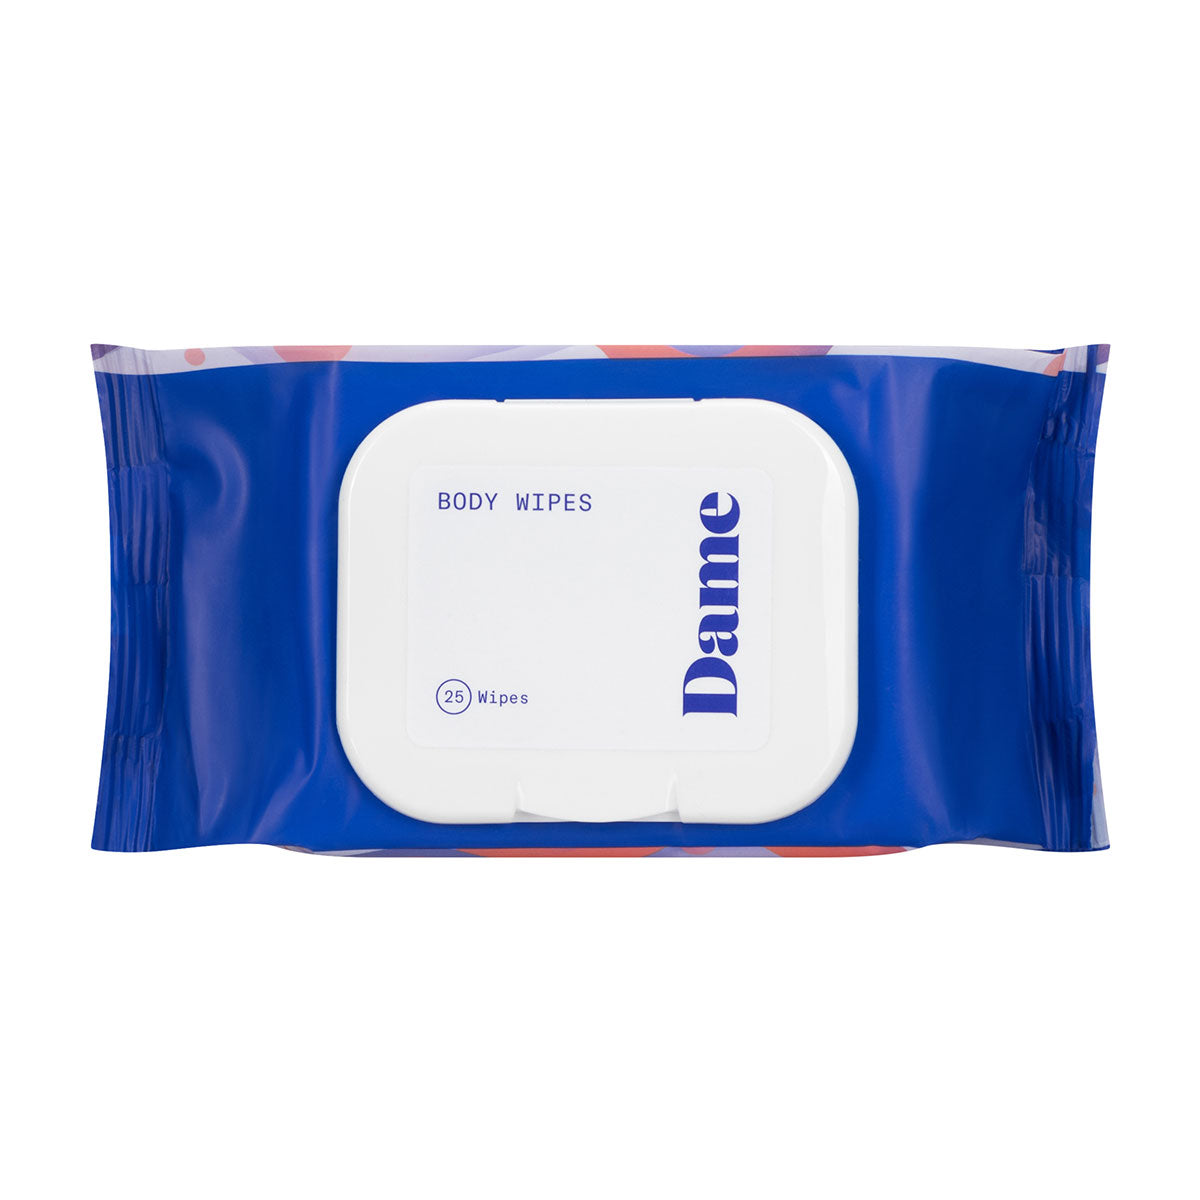 Body Wipes by Dame - 25ct